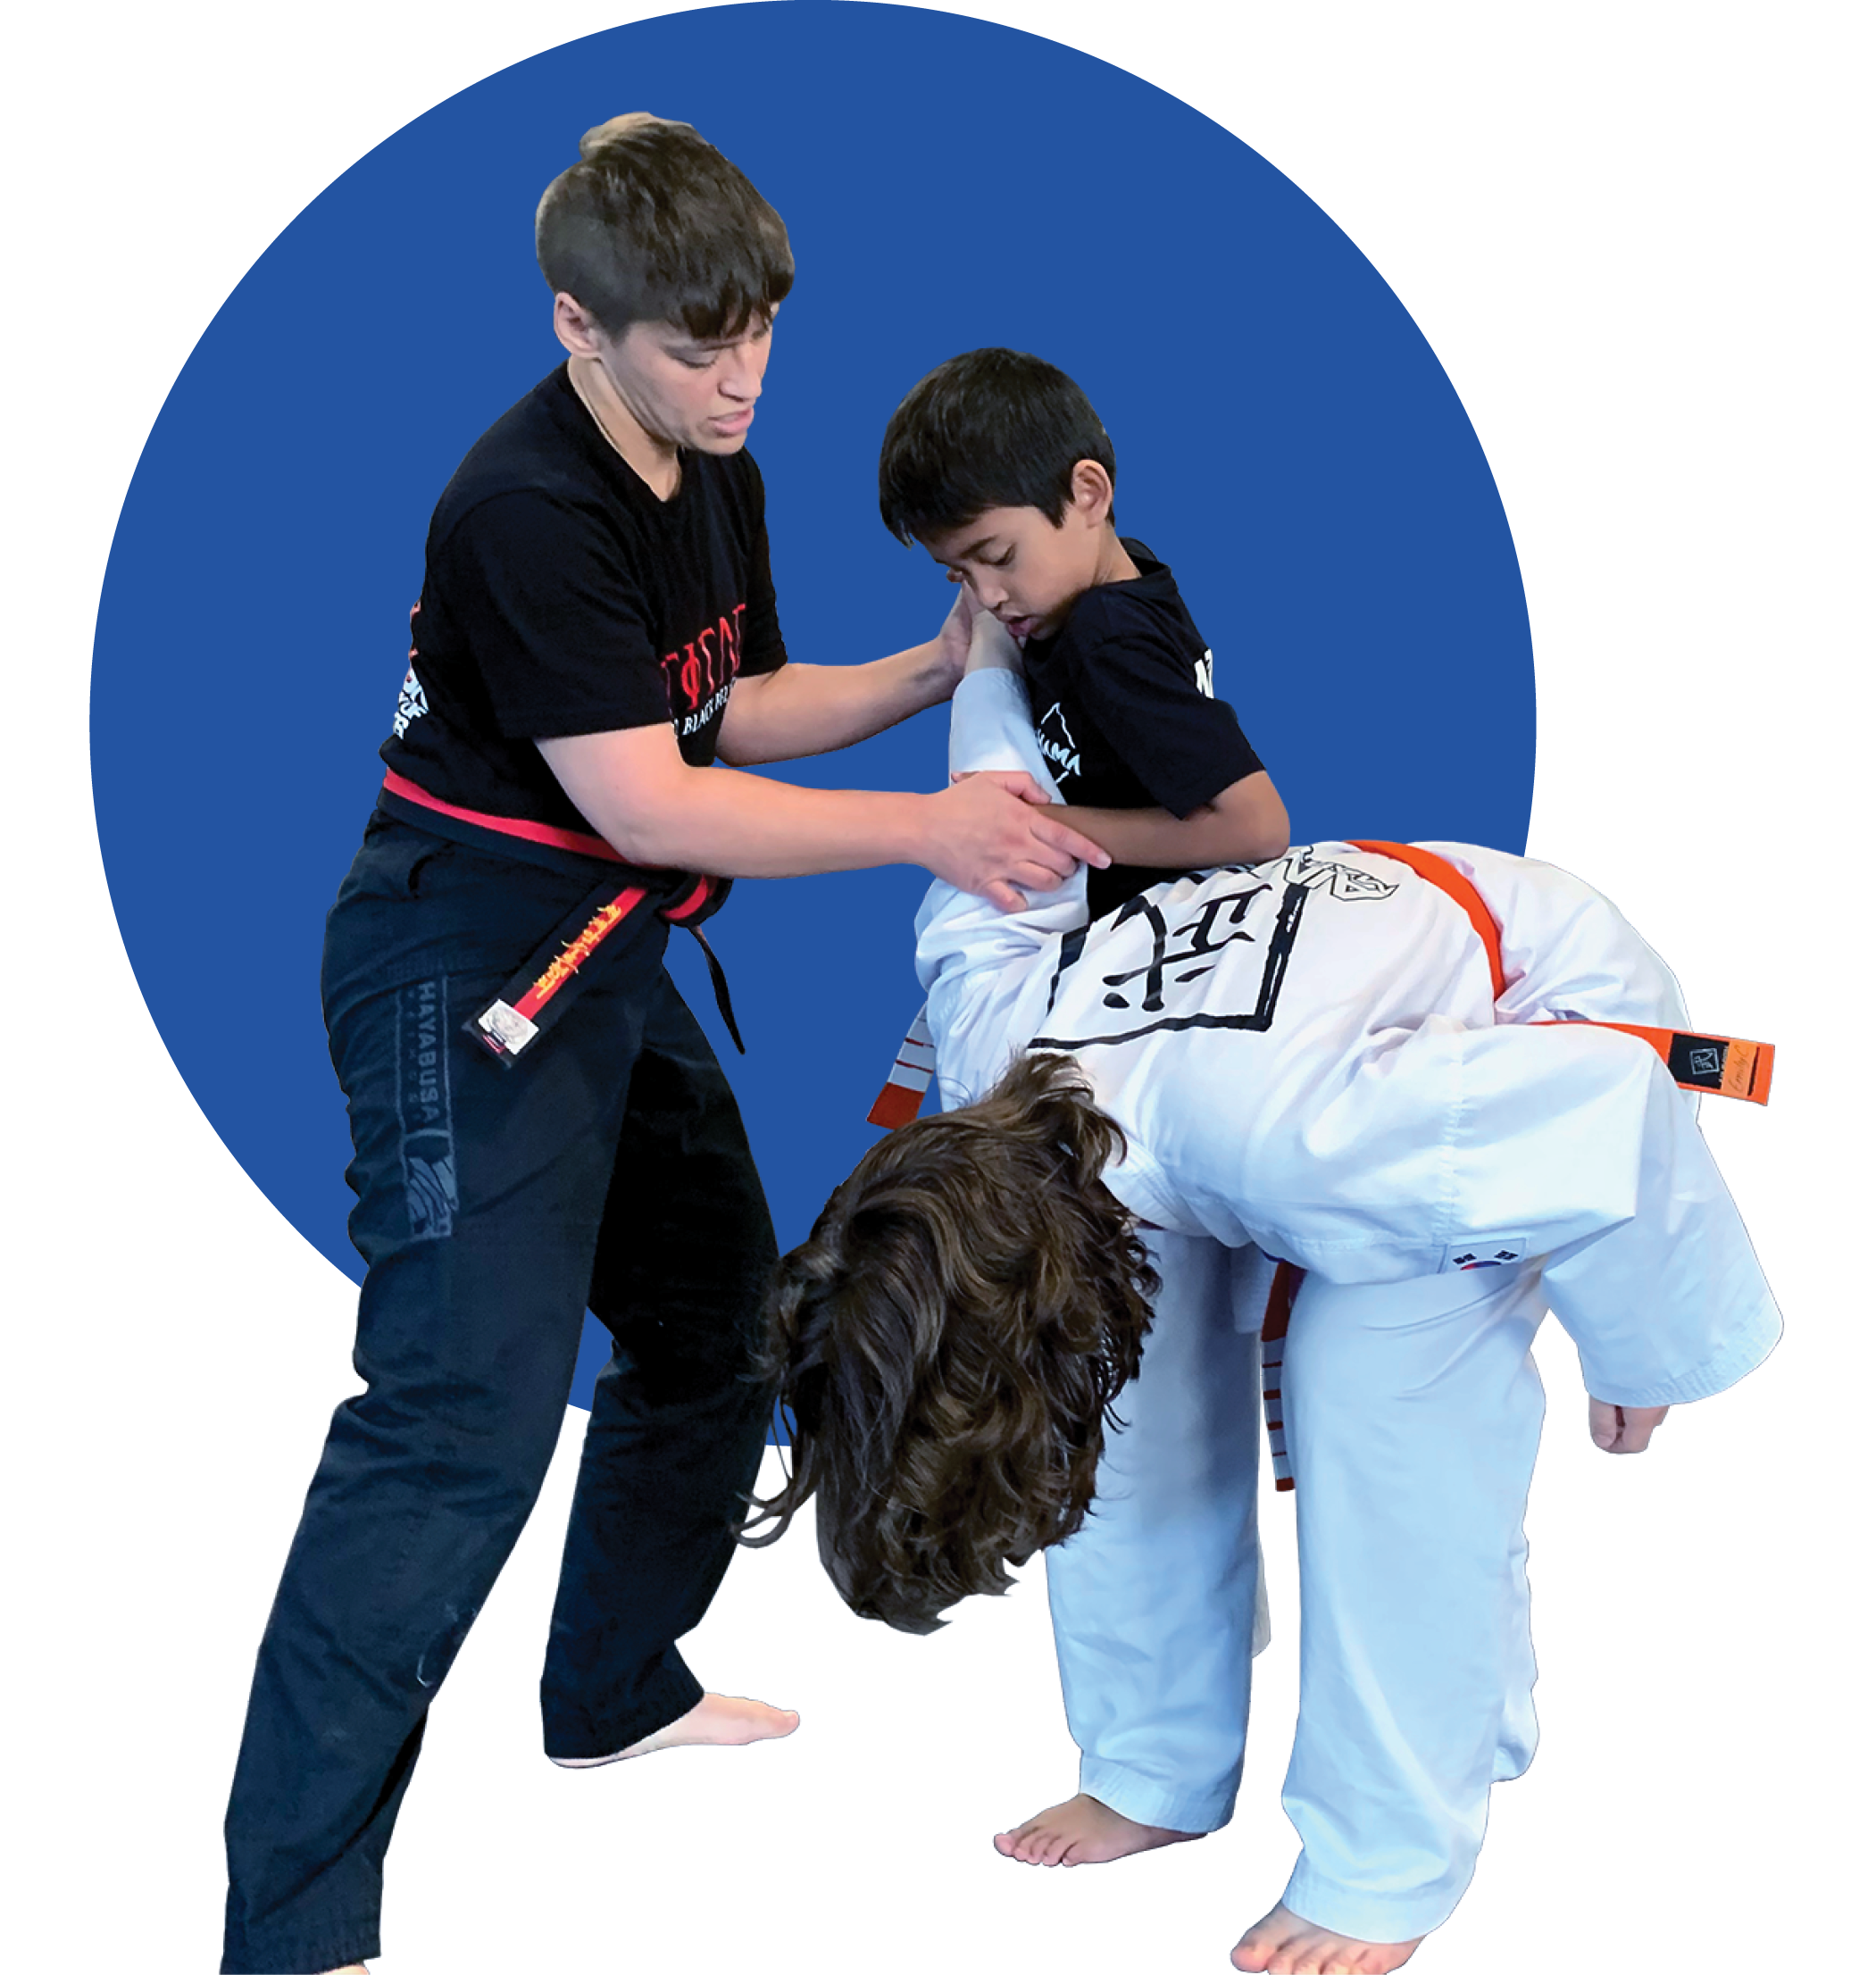 Teacher Maria helps her students with a hold.